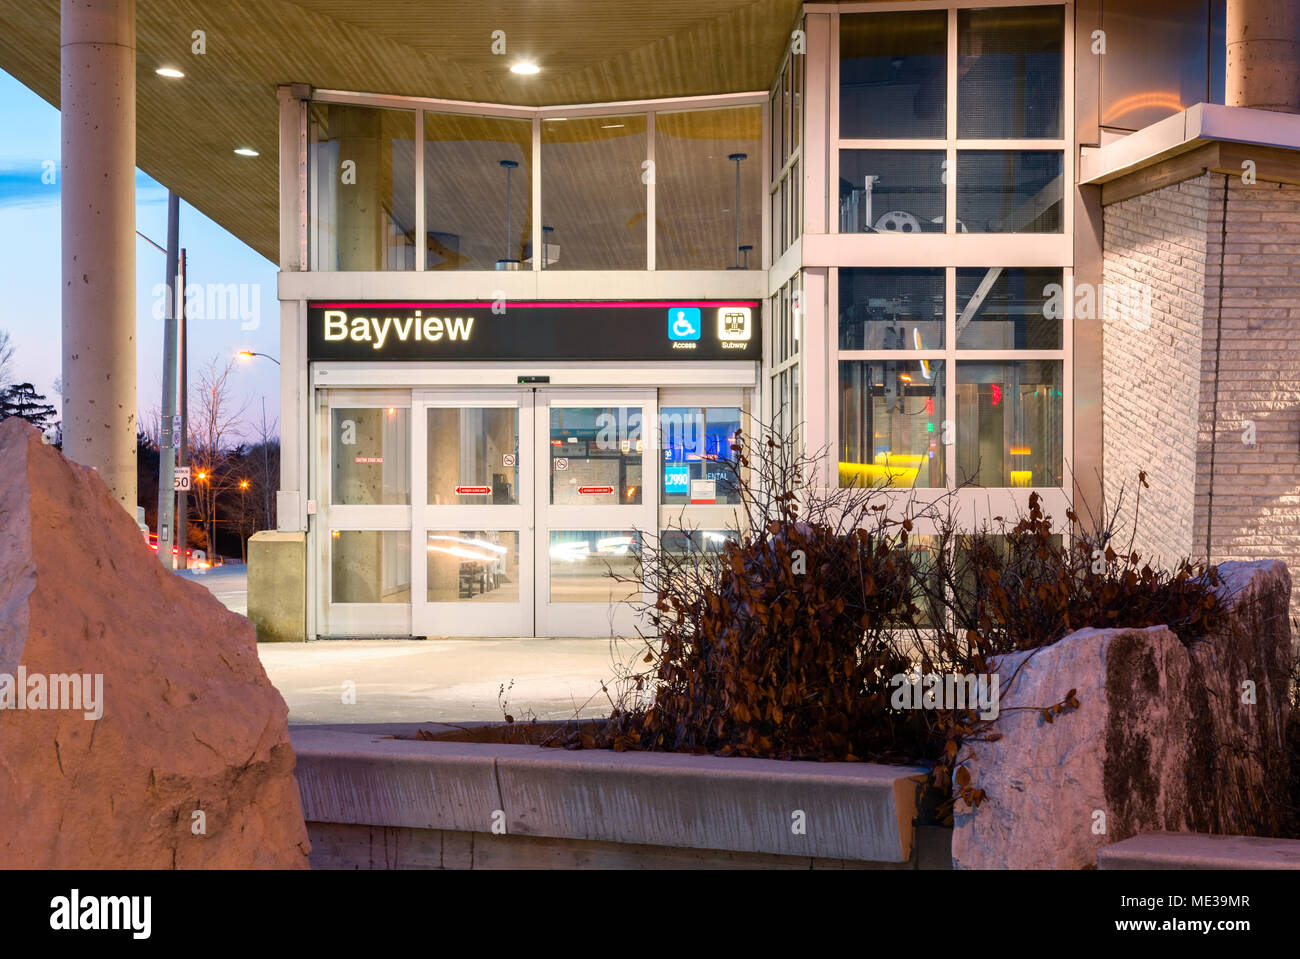 The TTC (Toronto Transit Commission) subwa Bayview station along the Line 4 Sheppard subway line in Toronto, Ontario, Canada. Stock Photo